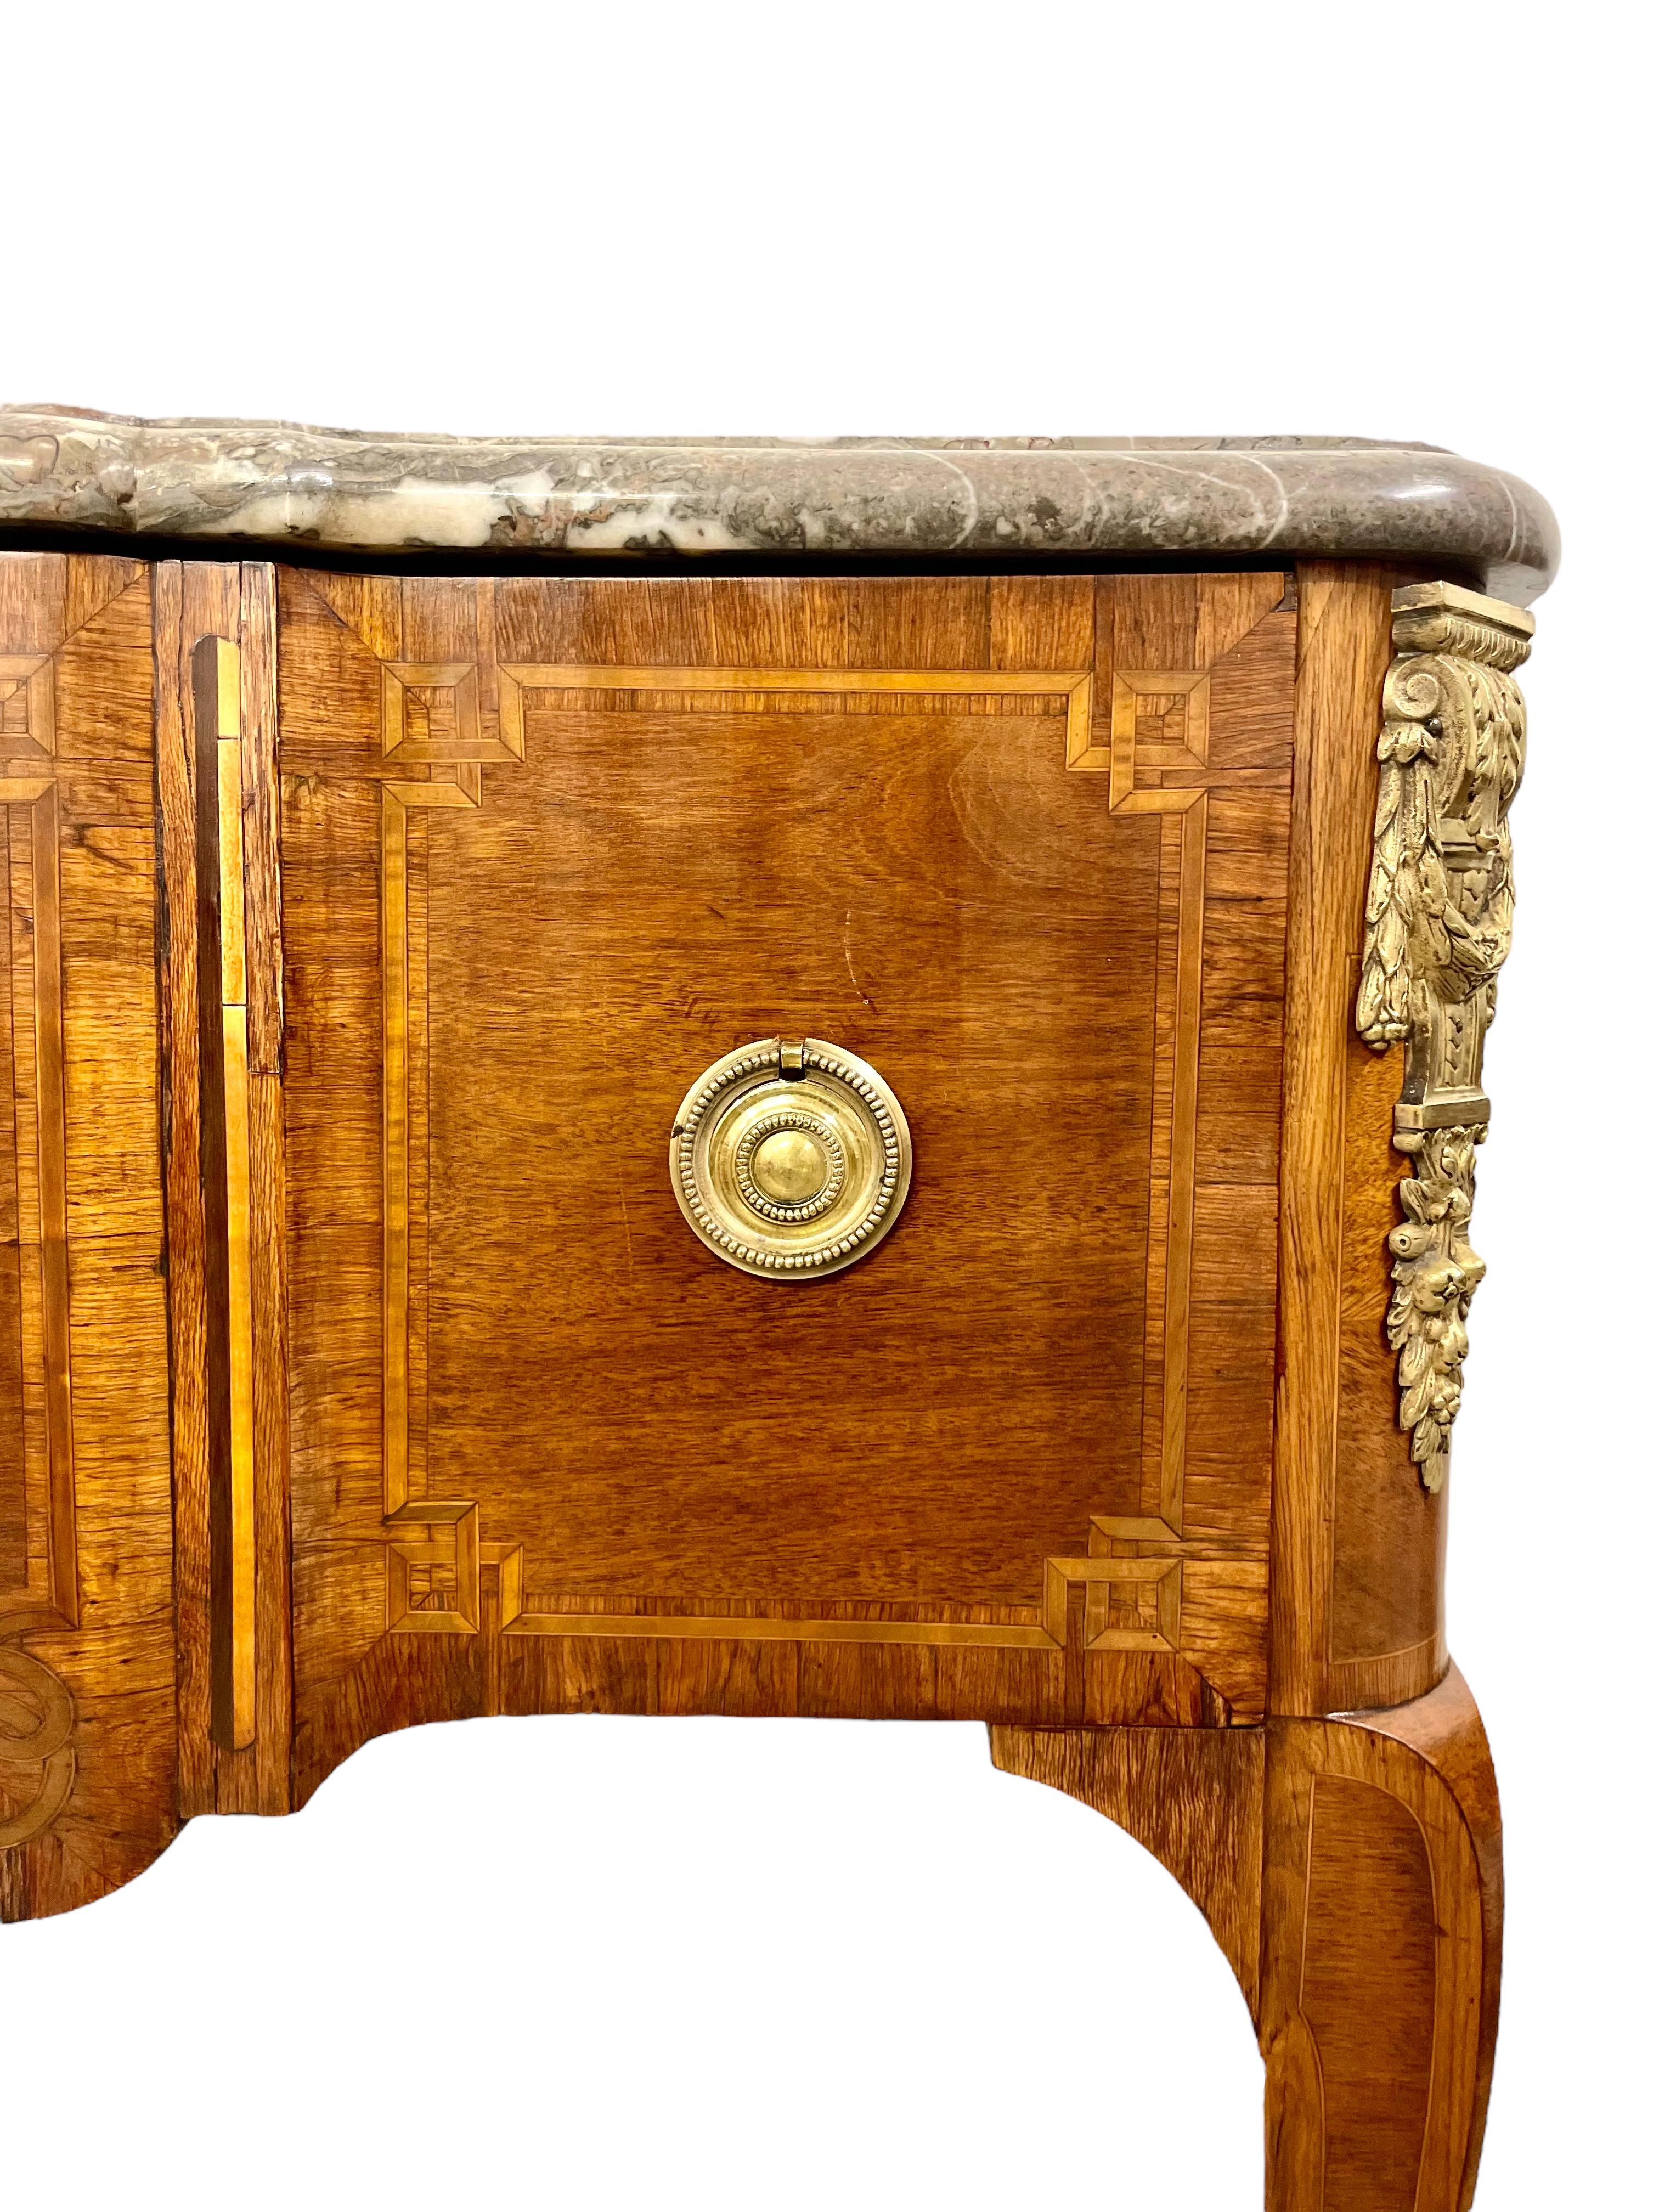 Inlay Louis XVI Period French Commode or Perruquière 18th Century For Sale